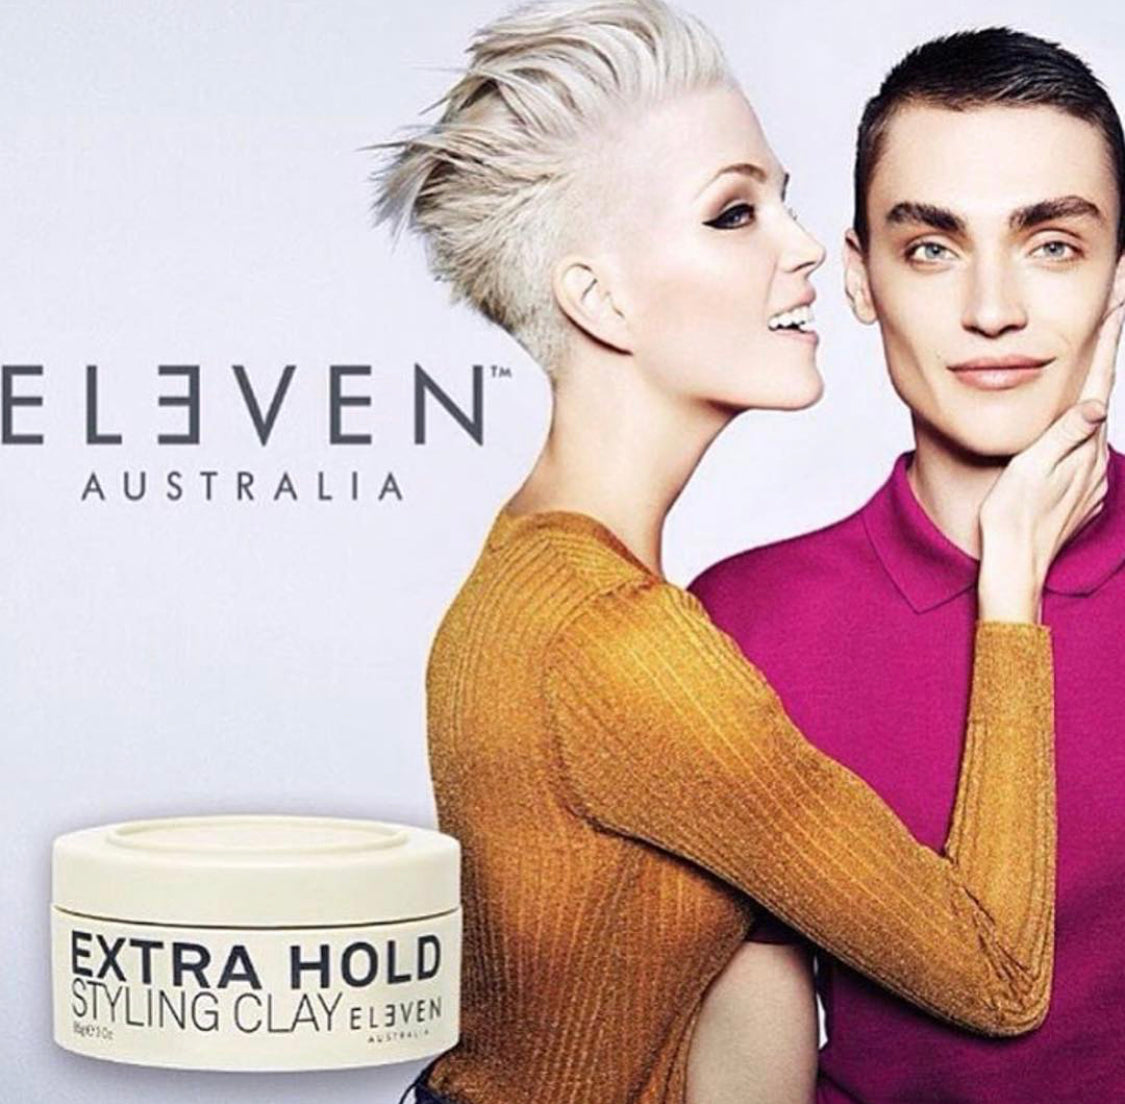 ELEVEN AUSTRALIA - EXTRA HOLD STYLING CLAY 85gr